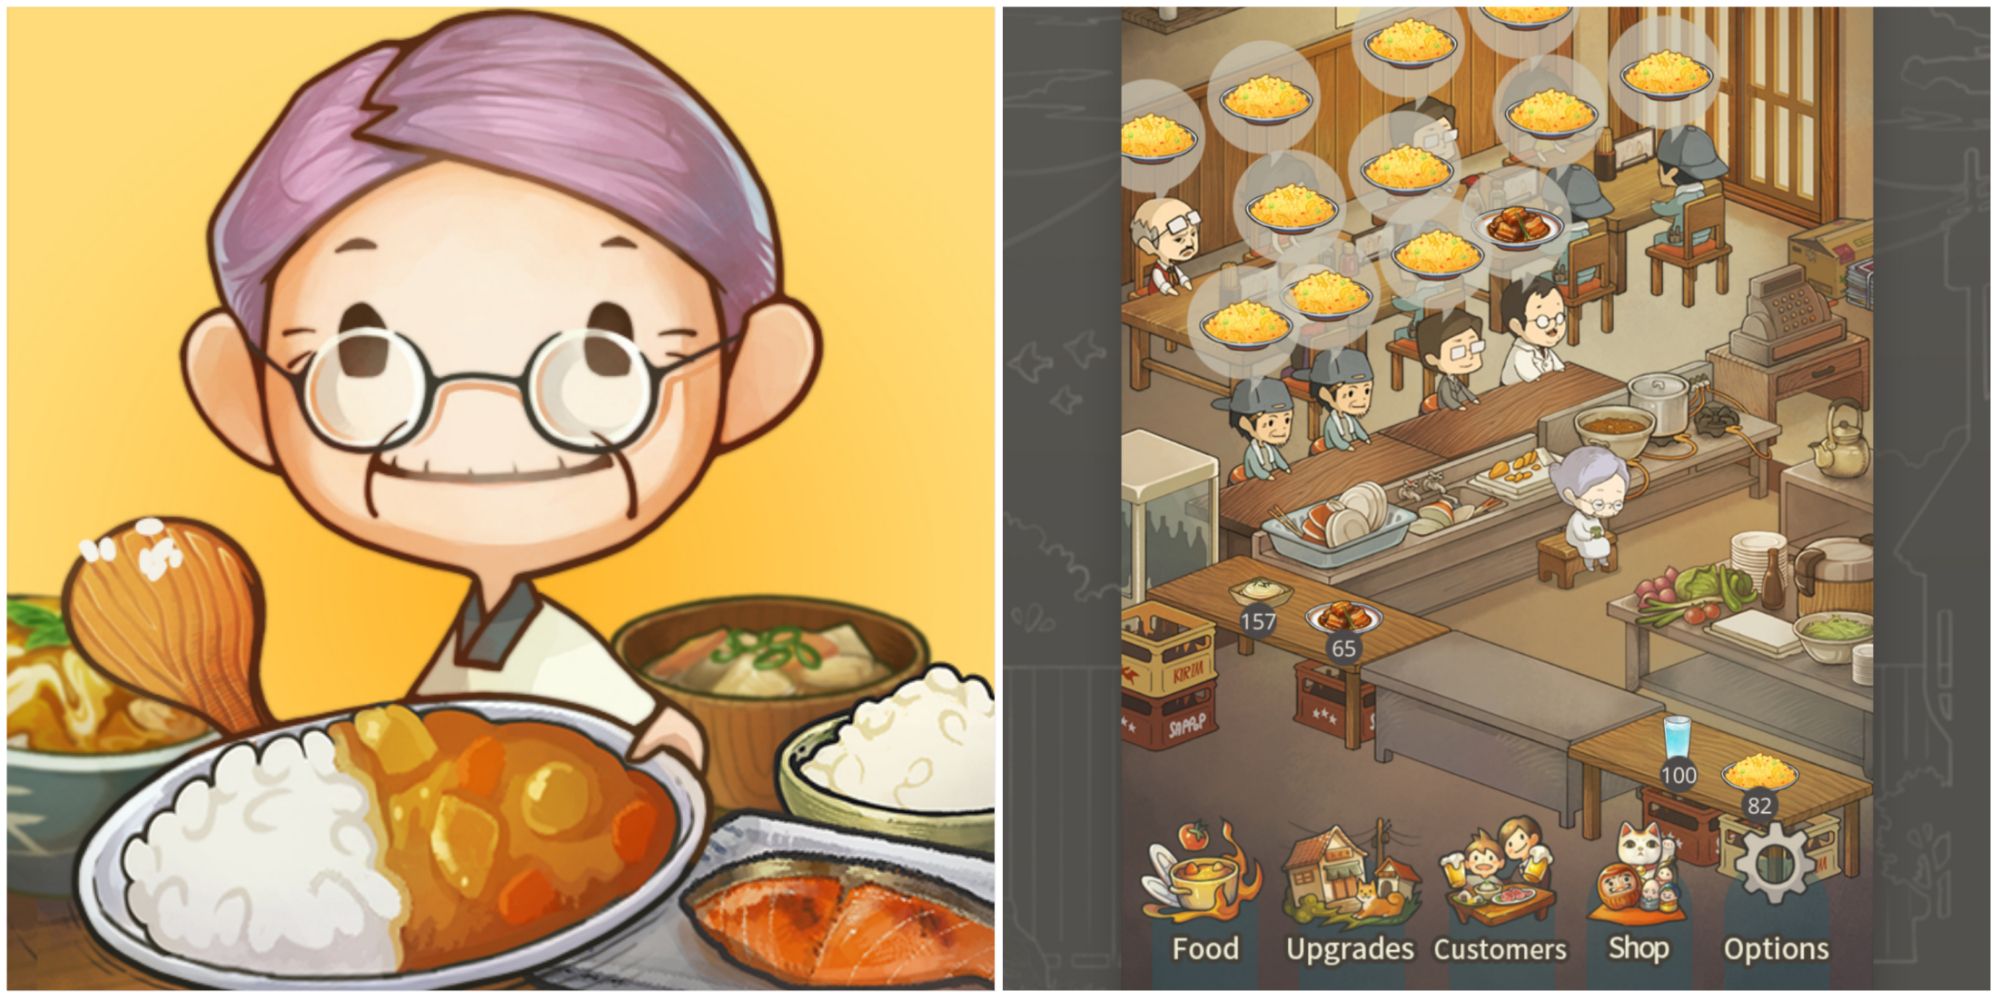 A split image of grandma serving curry over rice and grandma sitting by counter while customers order meals